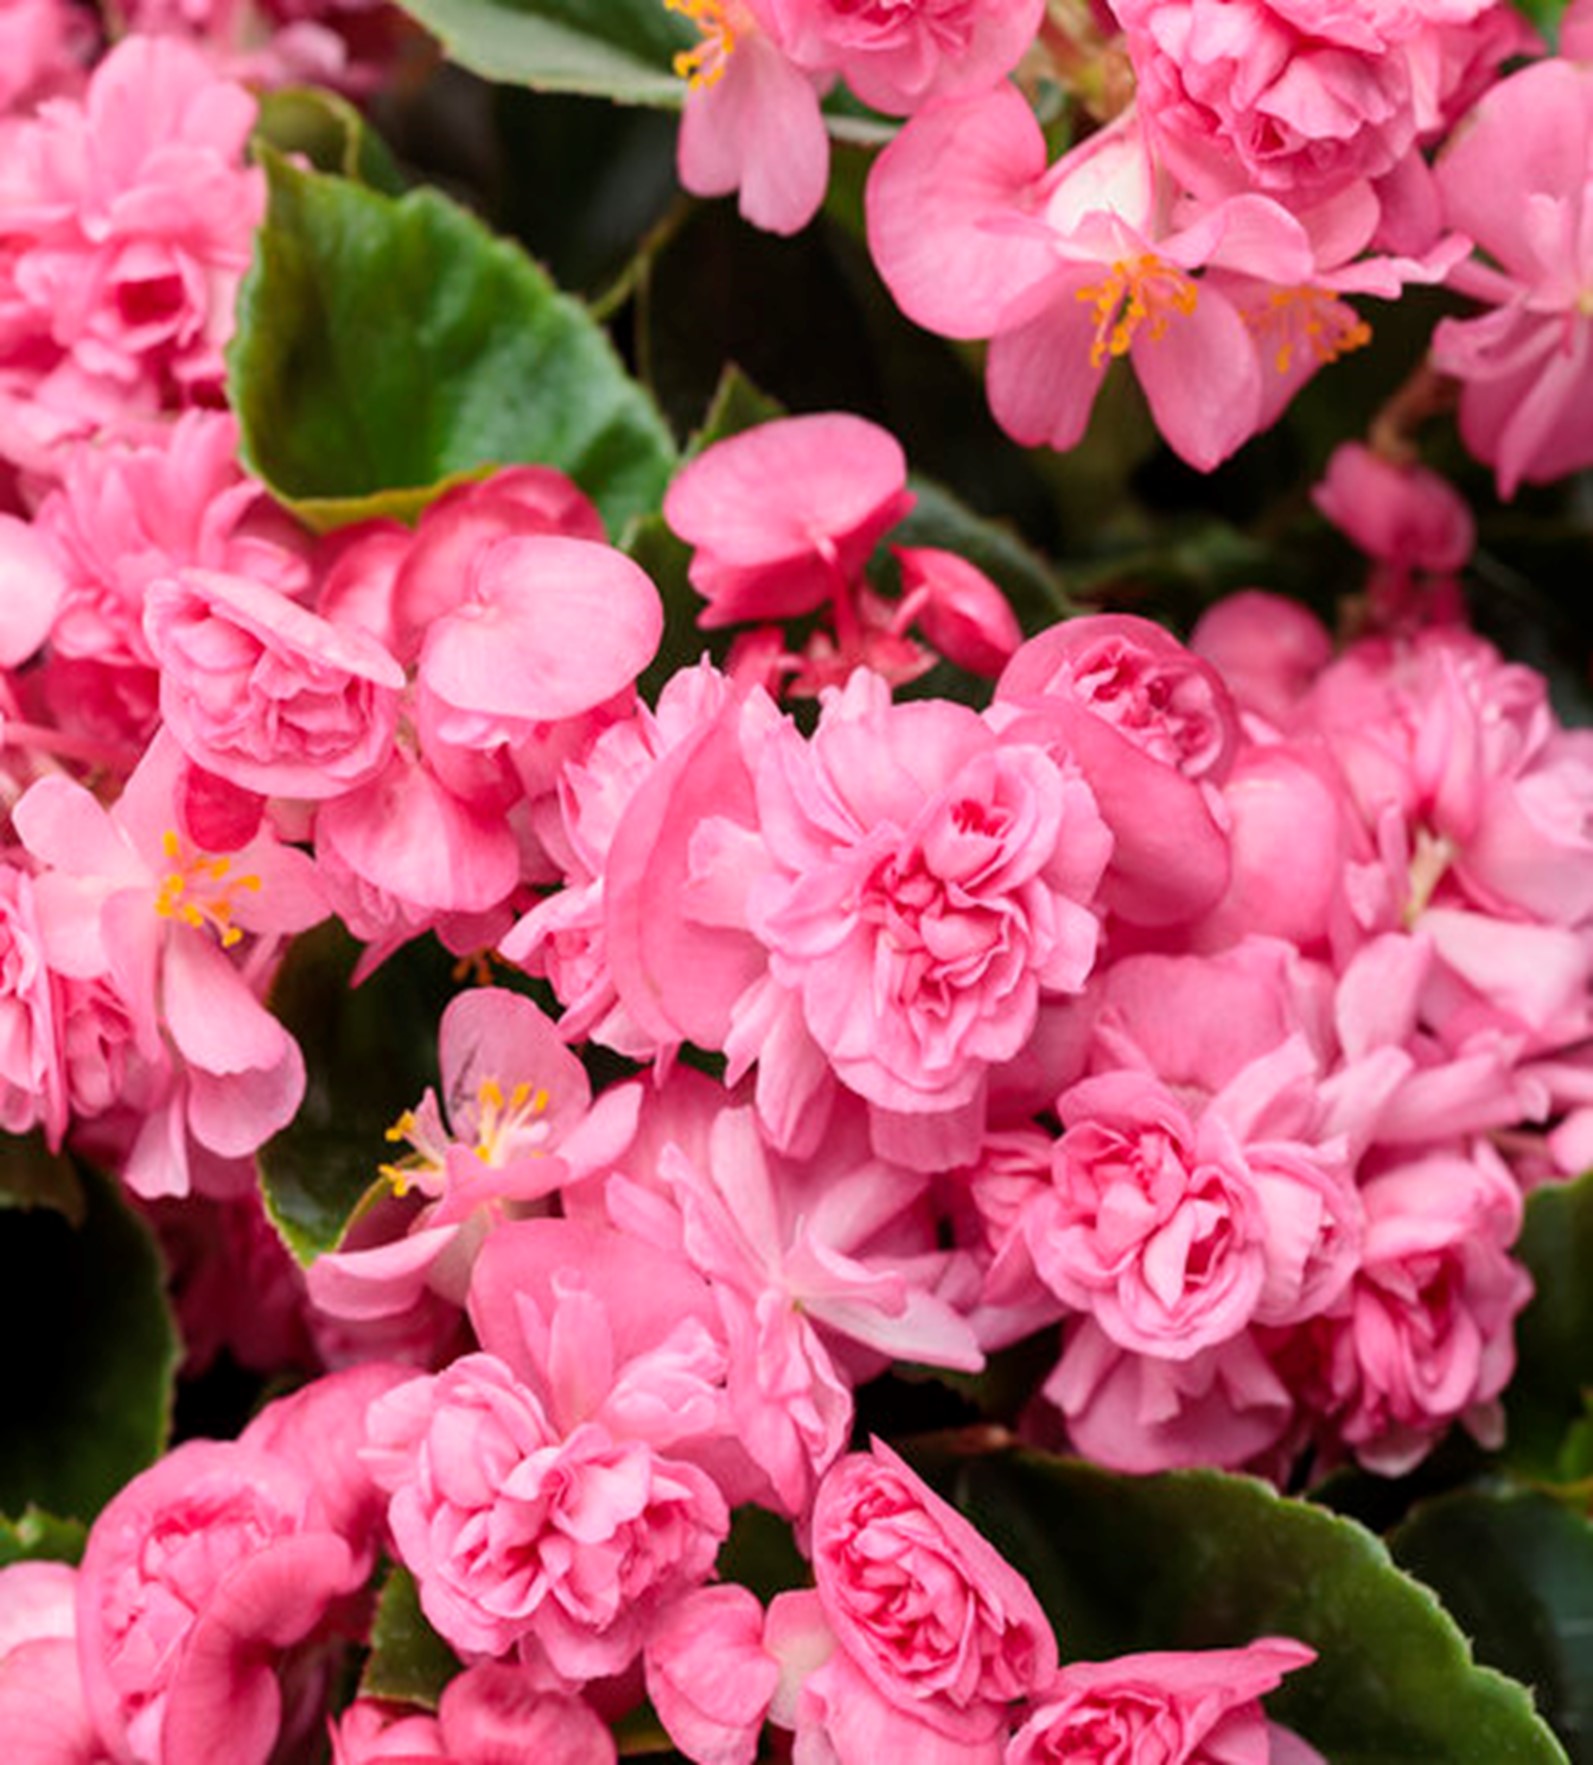 Begonia Lady in Pink